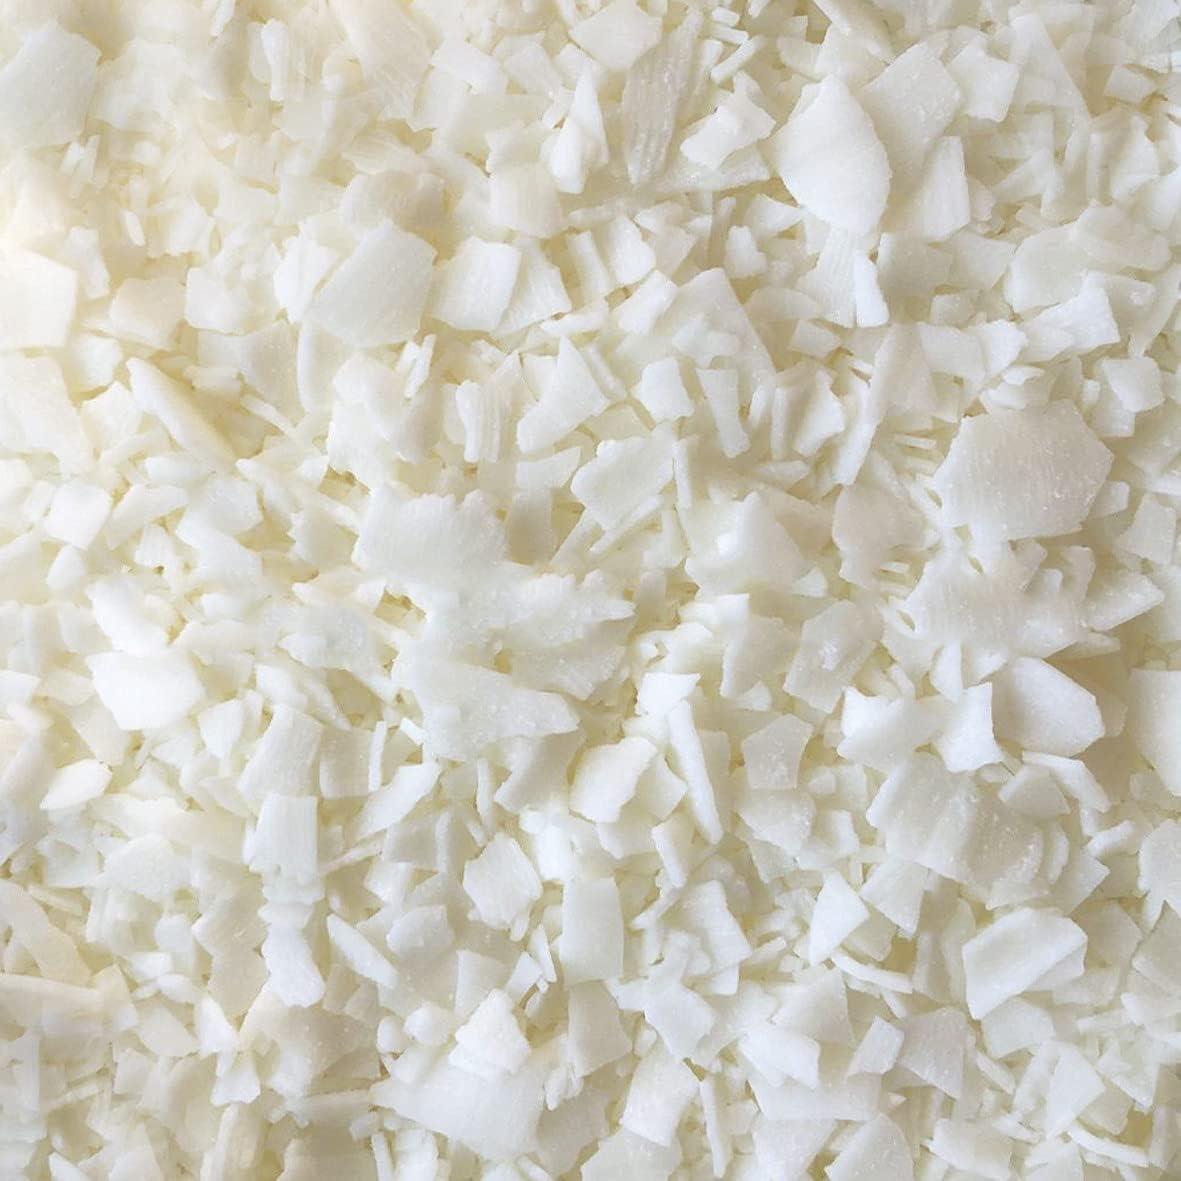 TooGet Pure White Soy Wax Flakes, 100% Natural Soy Wax Bulk for Candle  Making DIY, Premium Quality, Top Grade - 1 Pound